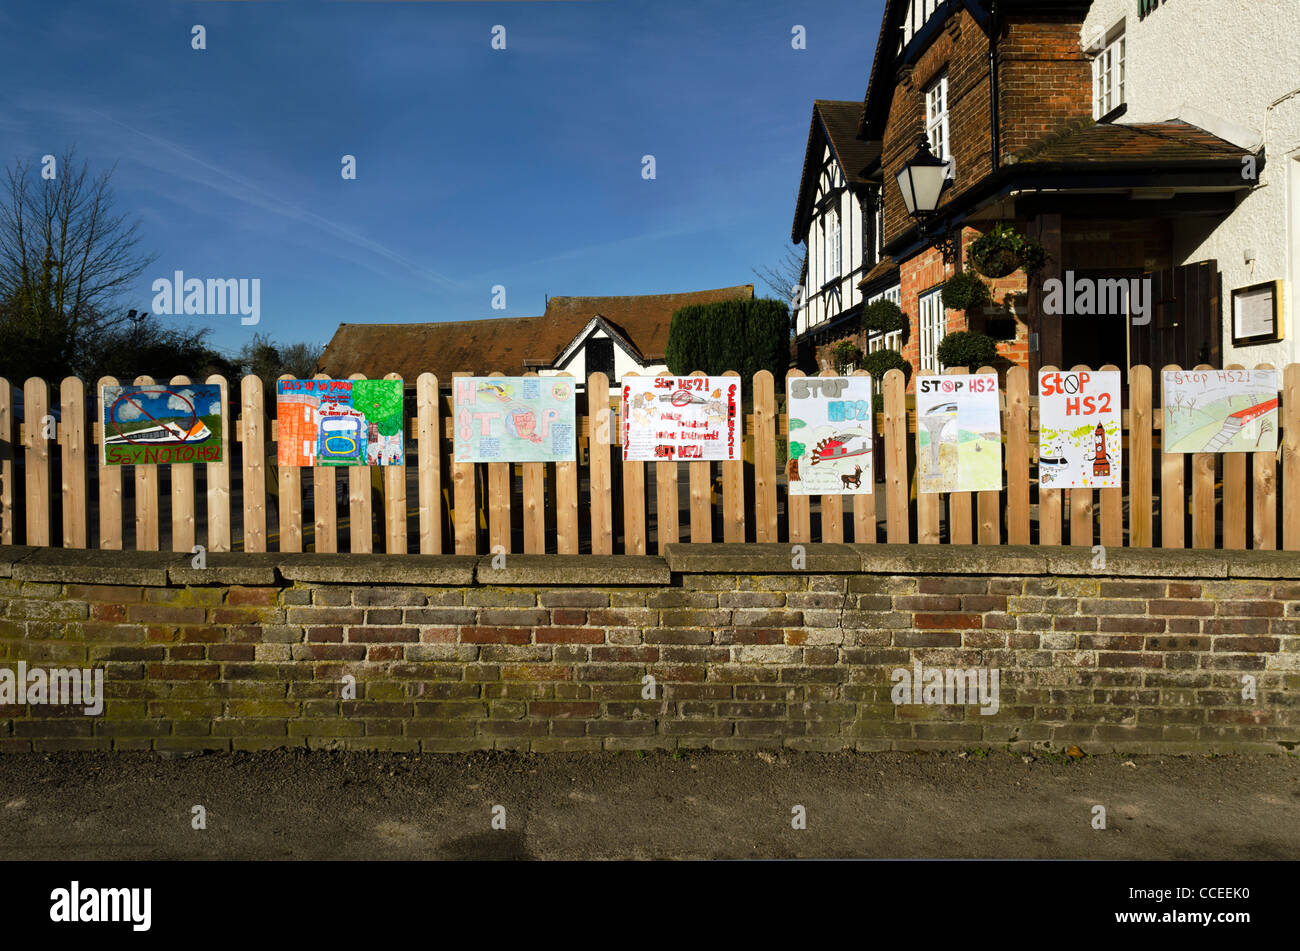 A row of children's paintings depicting protest against the Chiltern high speed rail link Wendover Bucks UK Stock Photo